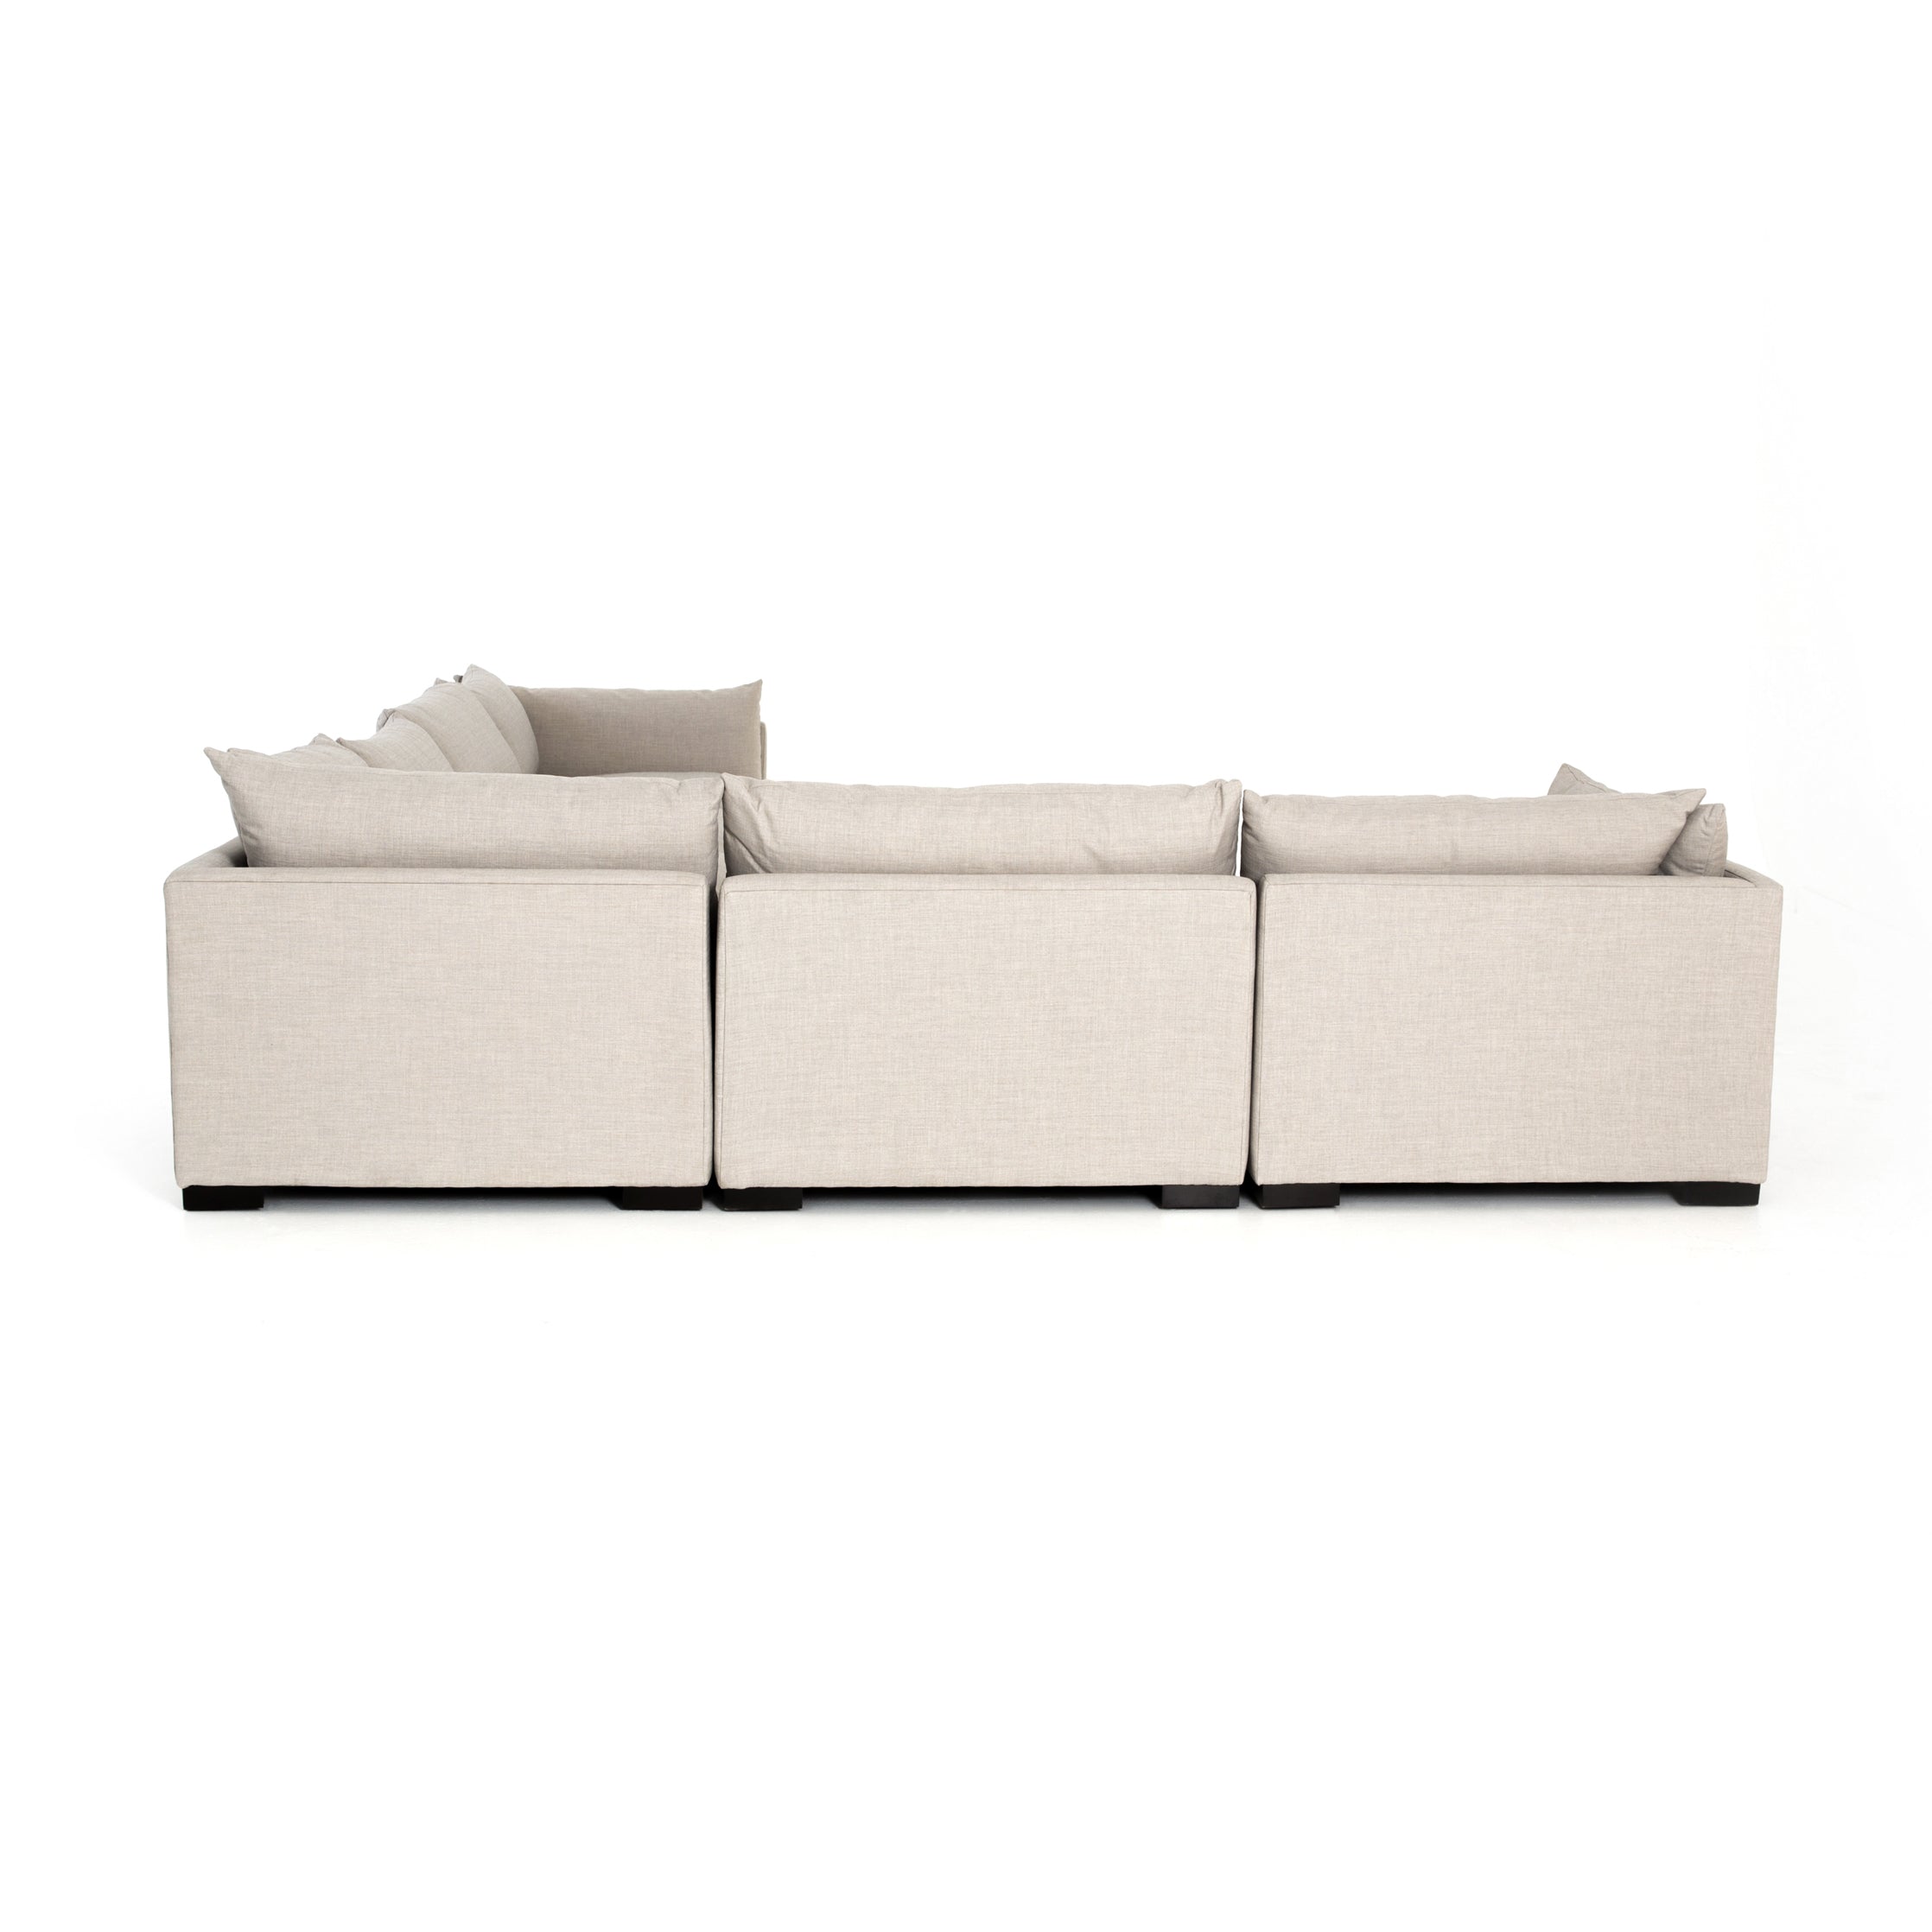 Westwood 6 Piece Sectional